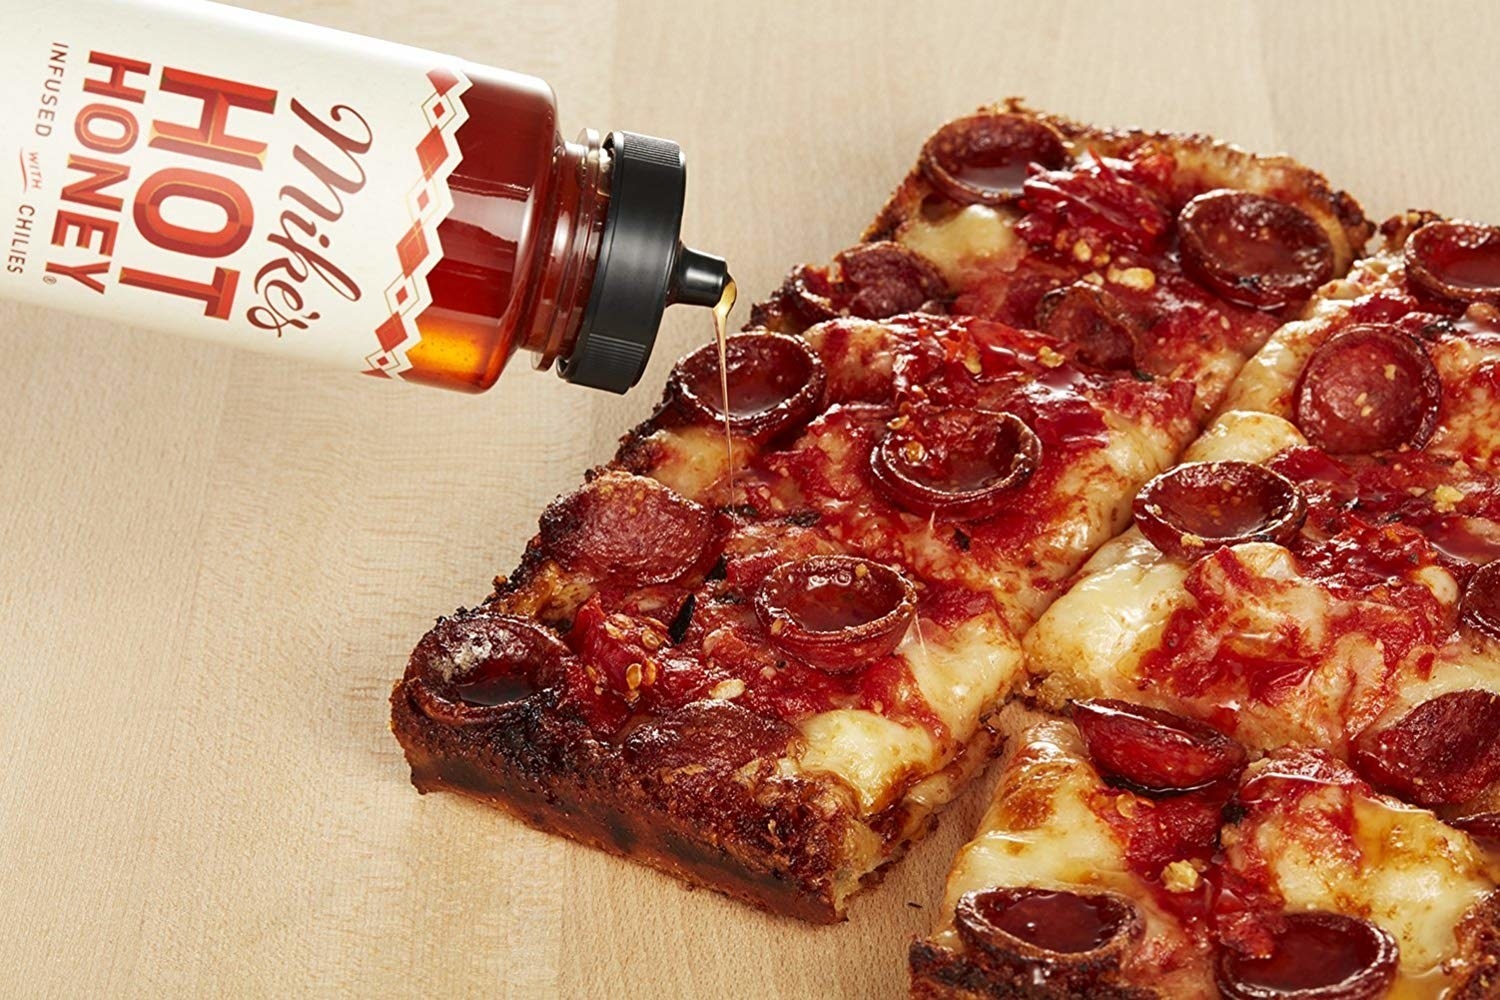 The honey being drizzled on pepperoni pizza